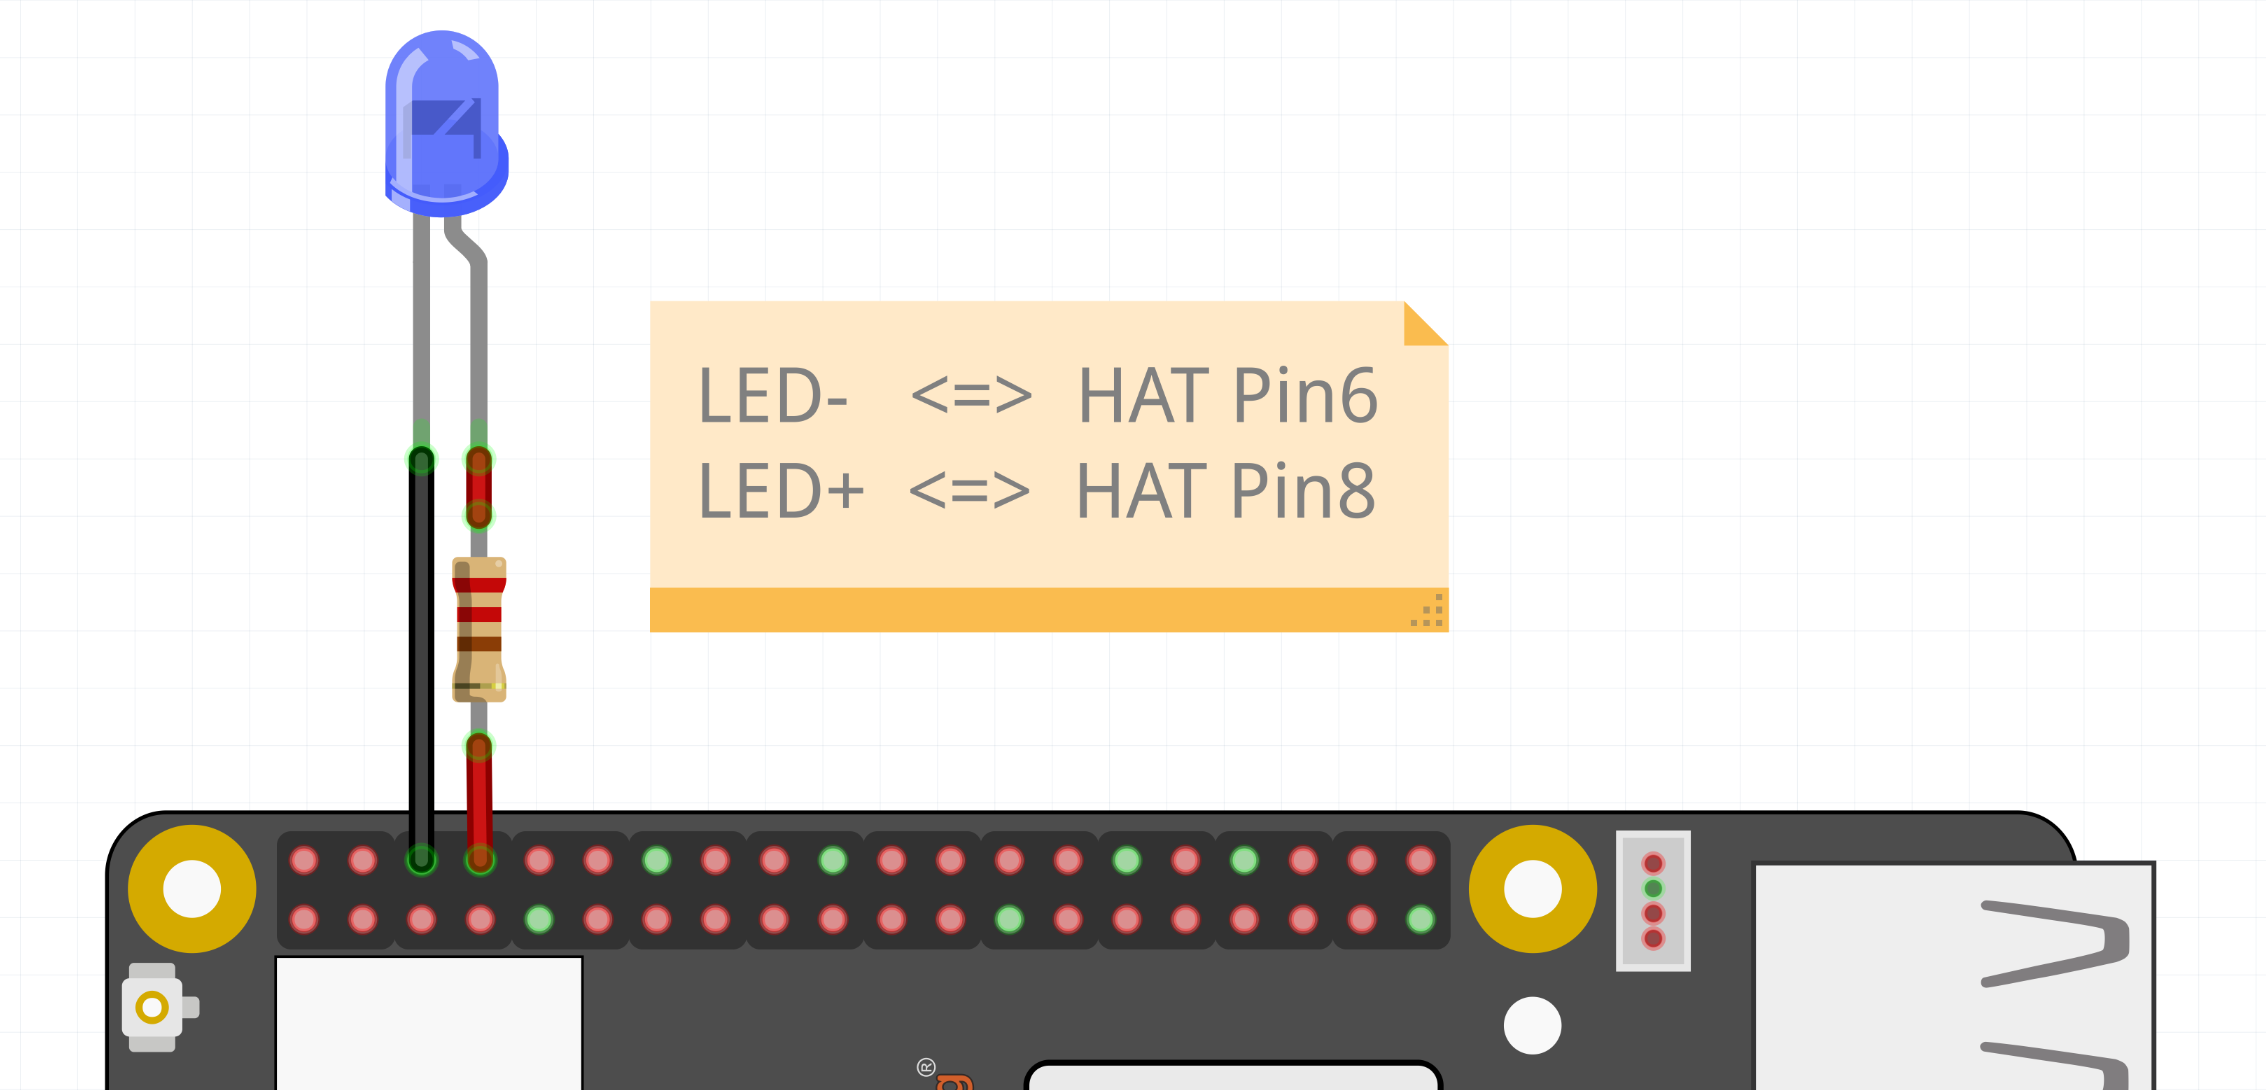 LED connected to HAT Pin8 (GPIO14)